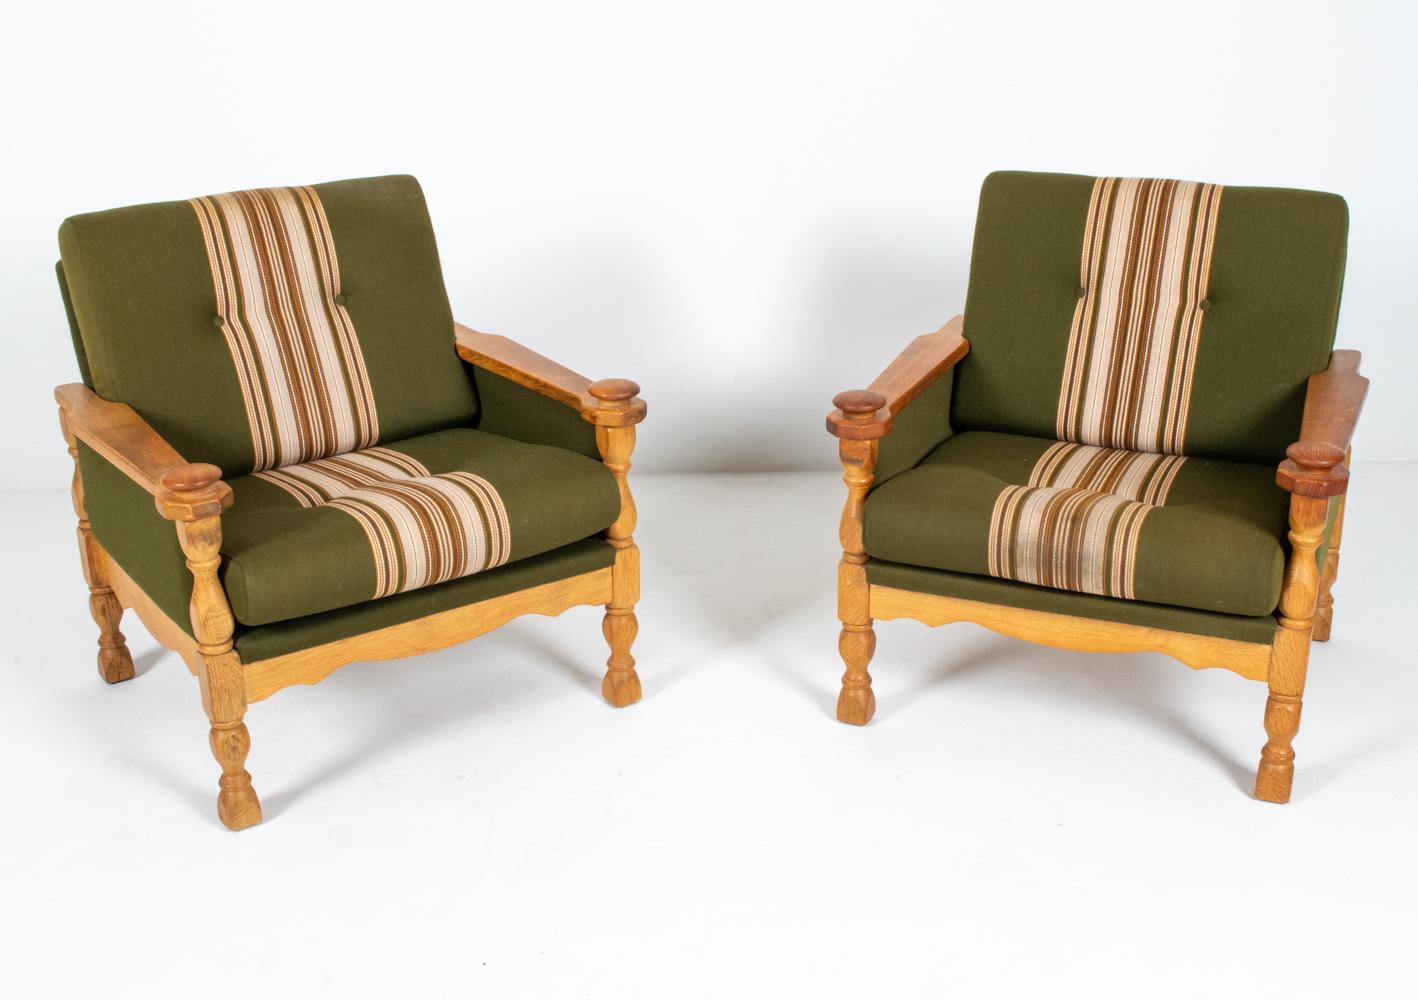 A rare and desirable pair of Danish mid-century lounge chairs designed by Henning Kjaernulf, c. 1960's. Crafted from quarter-sawn white oak, the frames feature sculpted handrests that offer a pleasing tactile experience, a testament to the